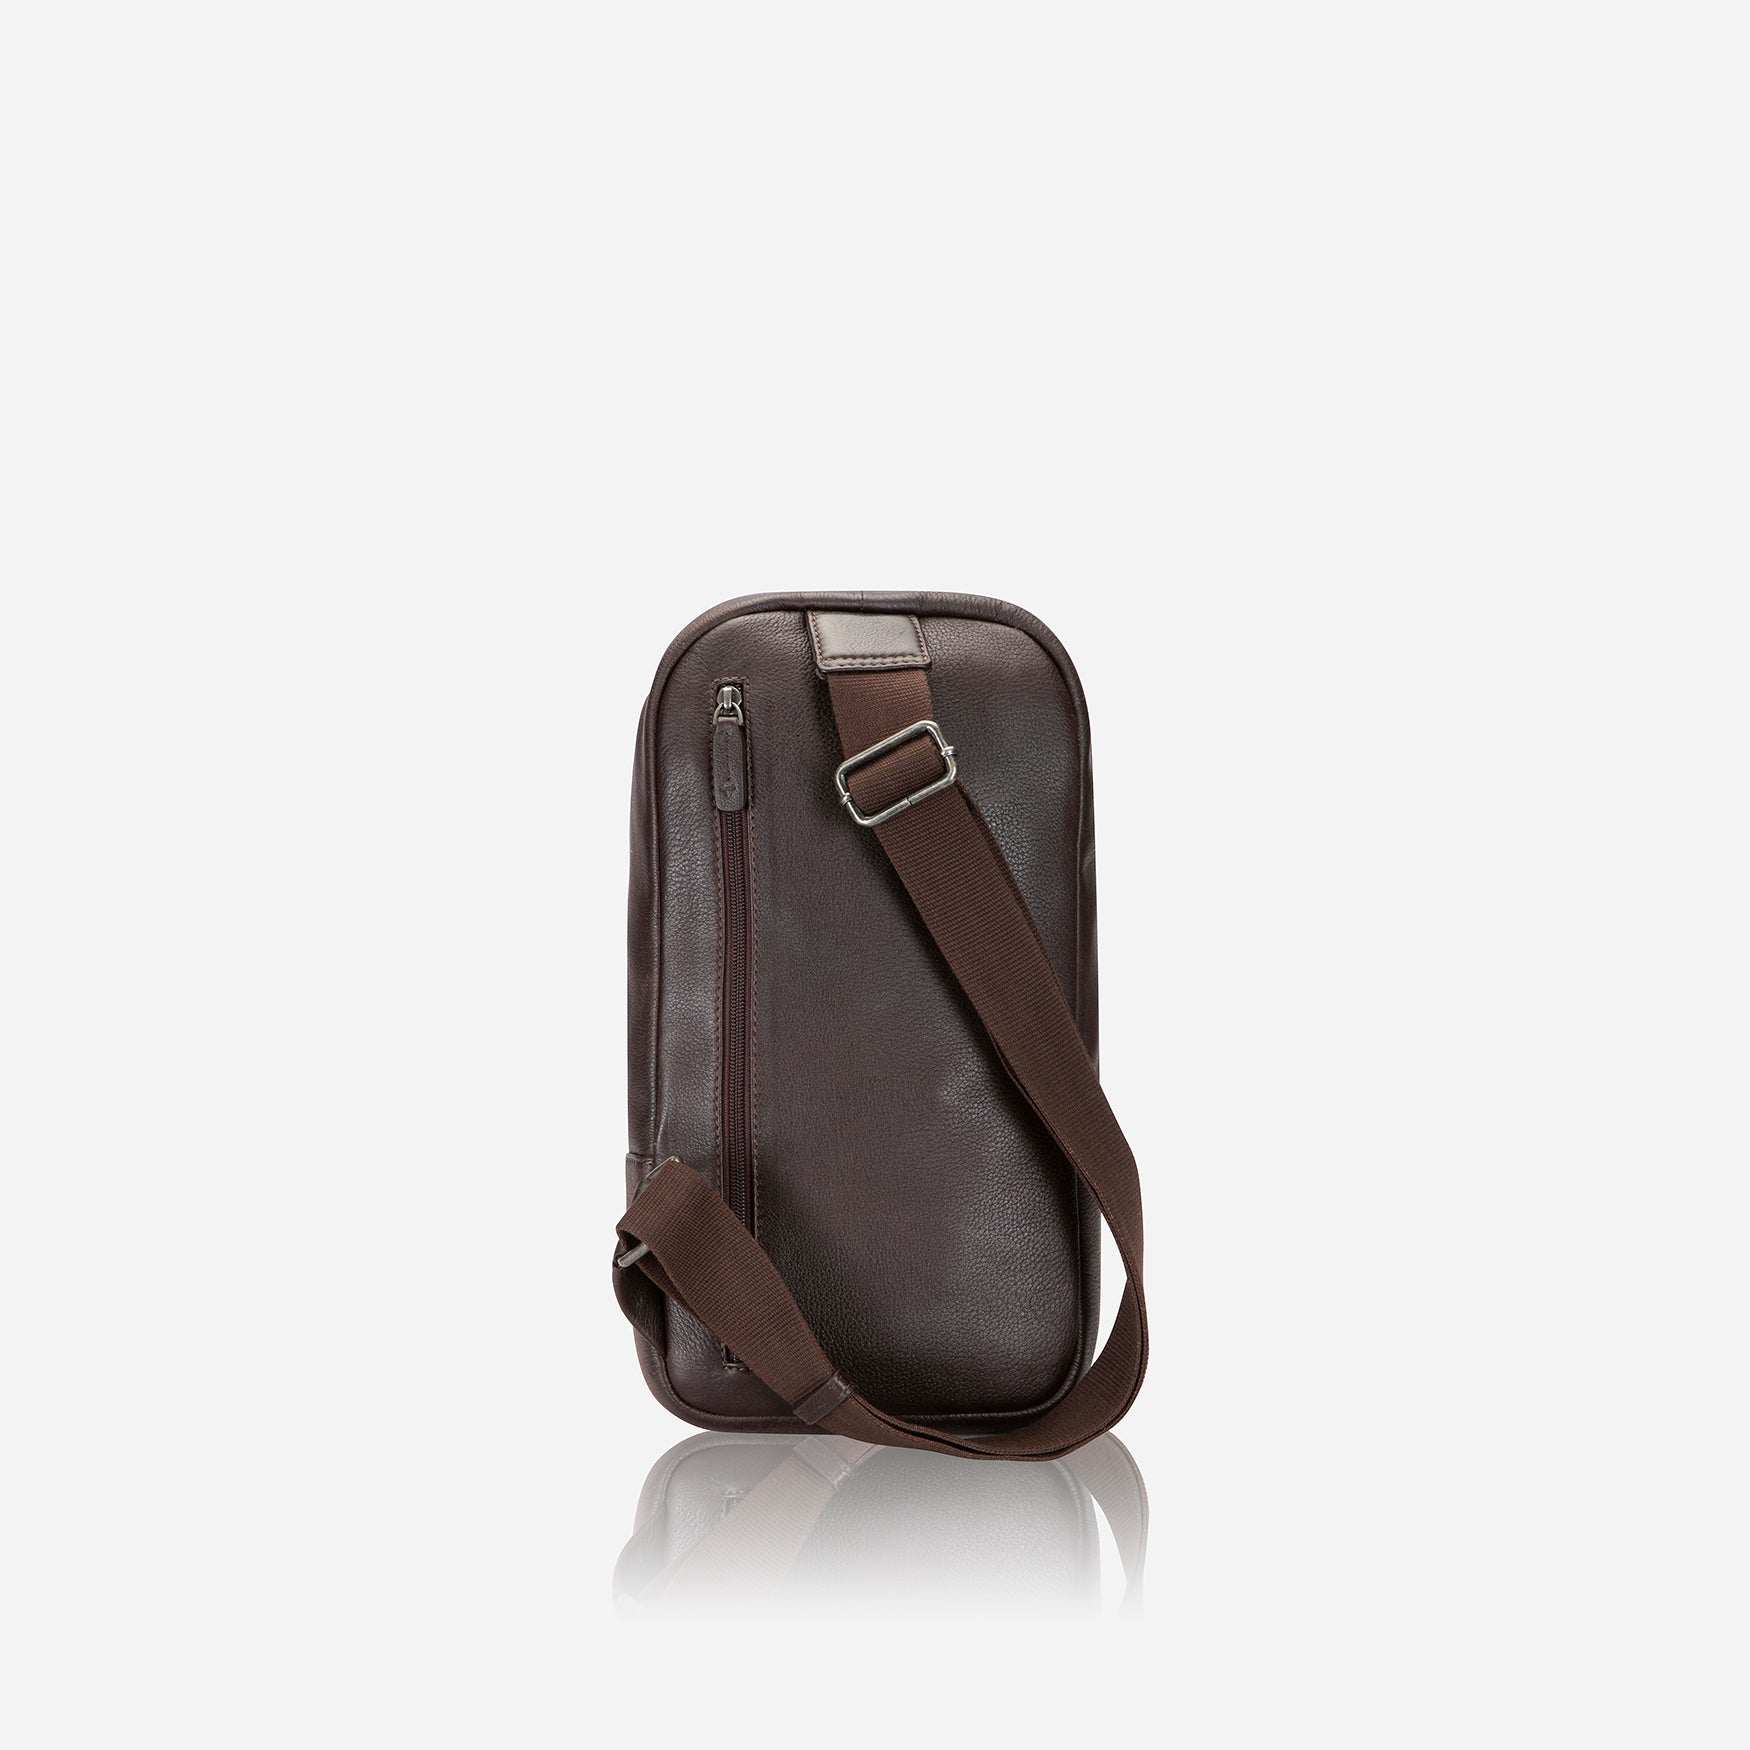 One Strap Backpack, Brown